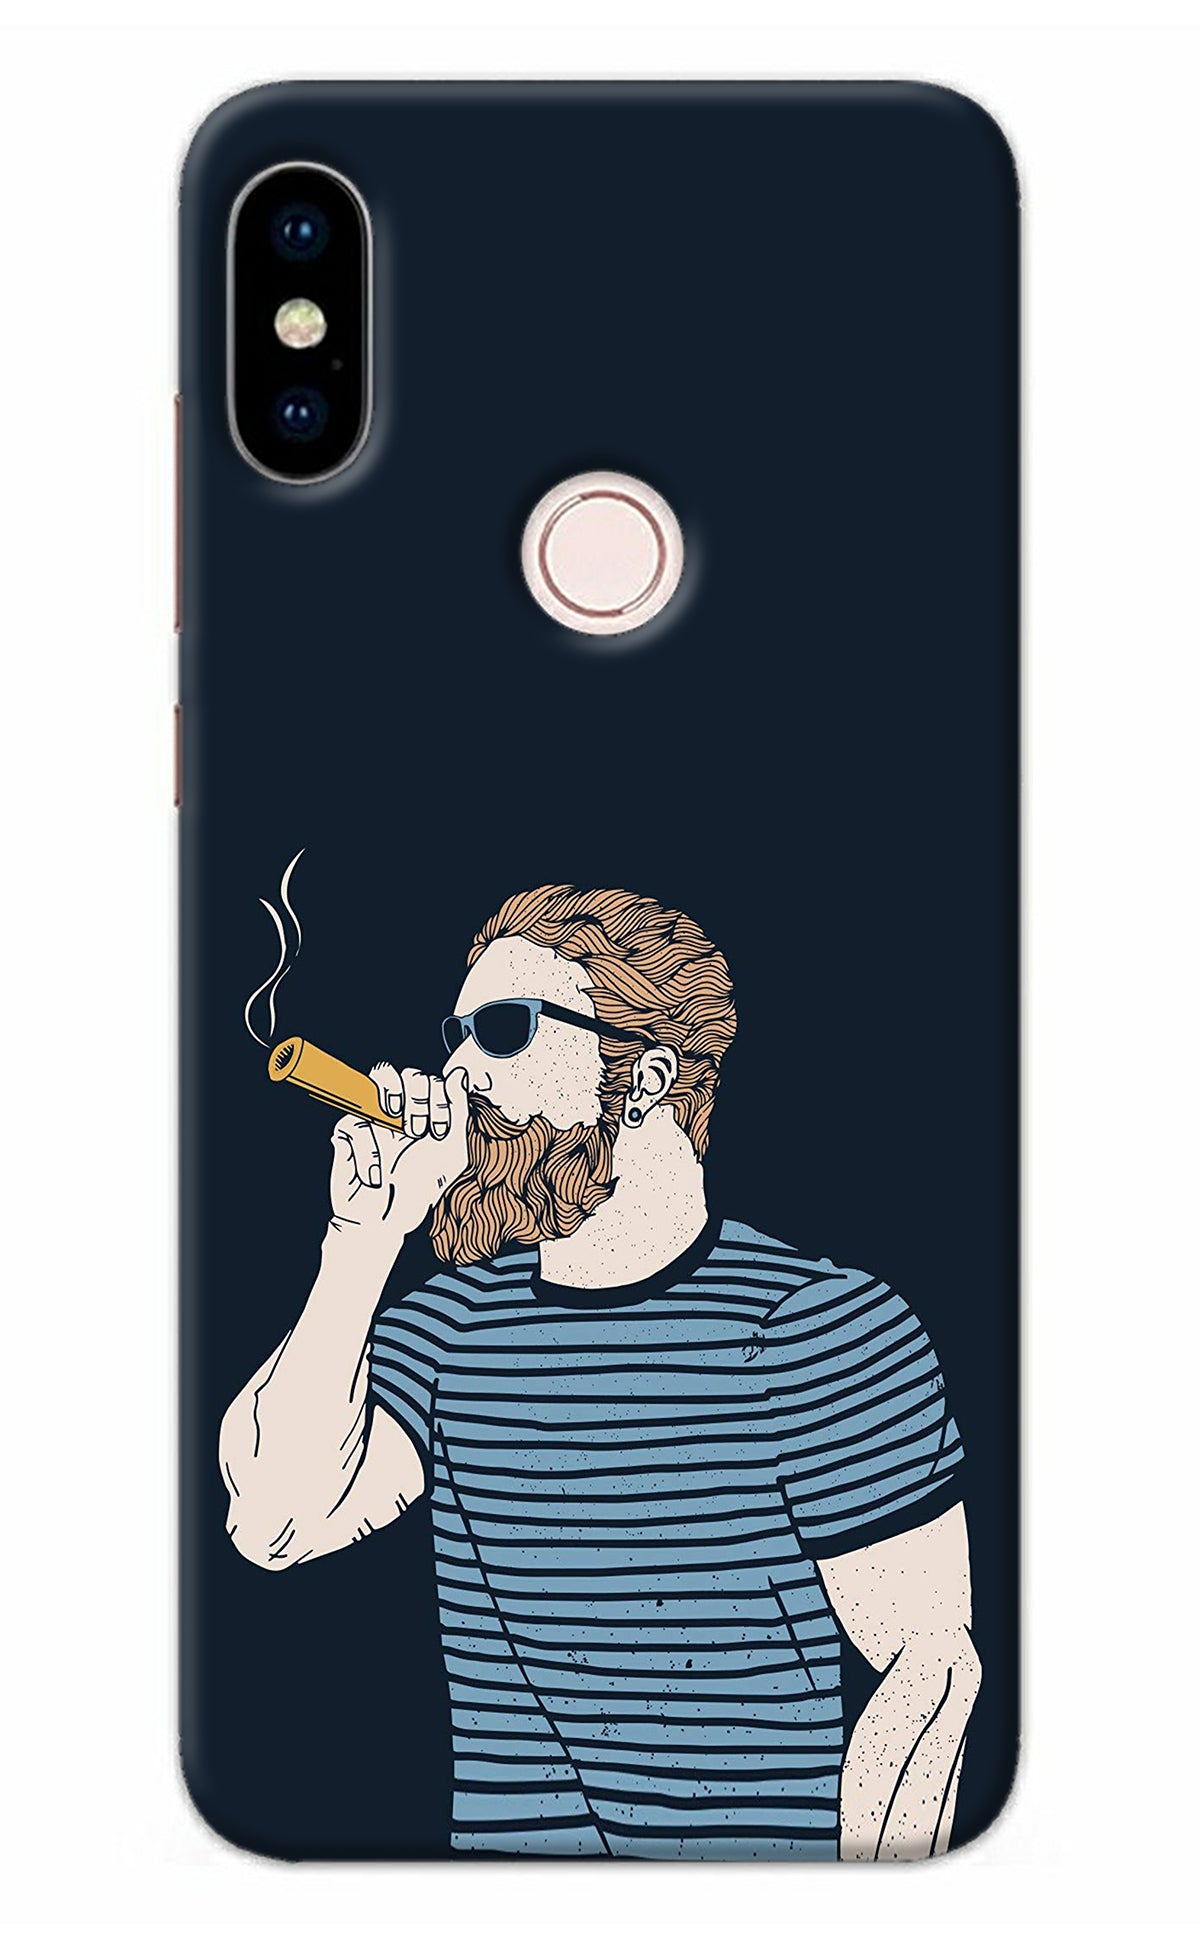 Smoking Redmi Note 5 Pro Back Cover